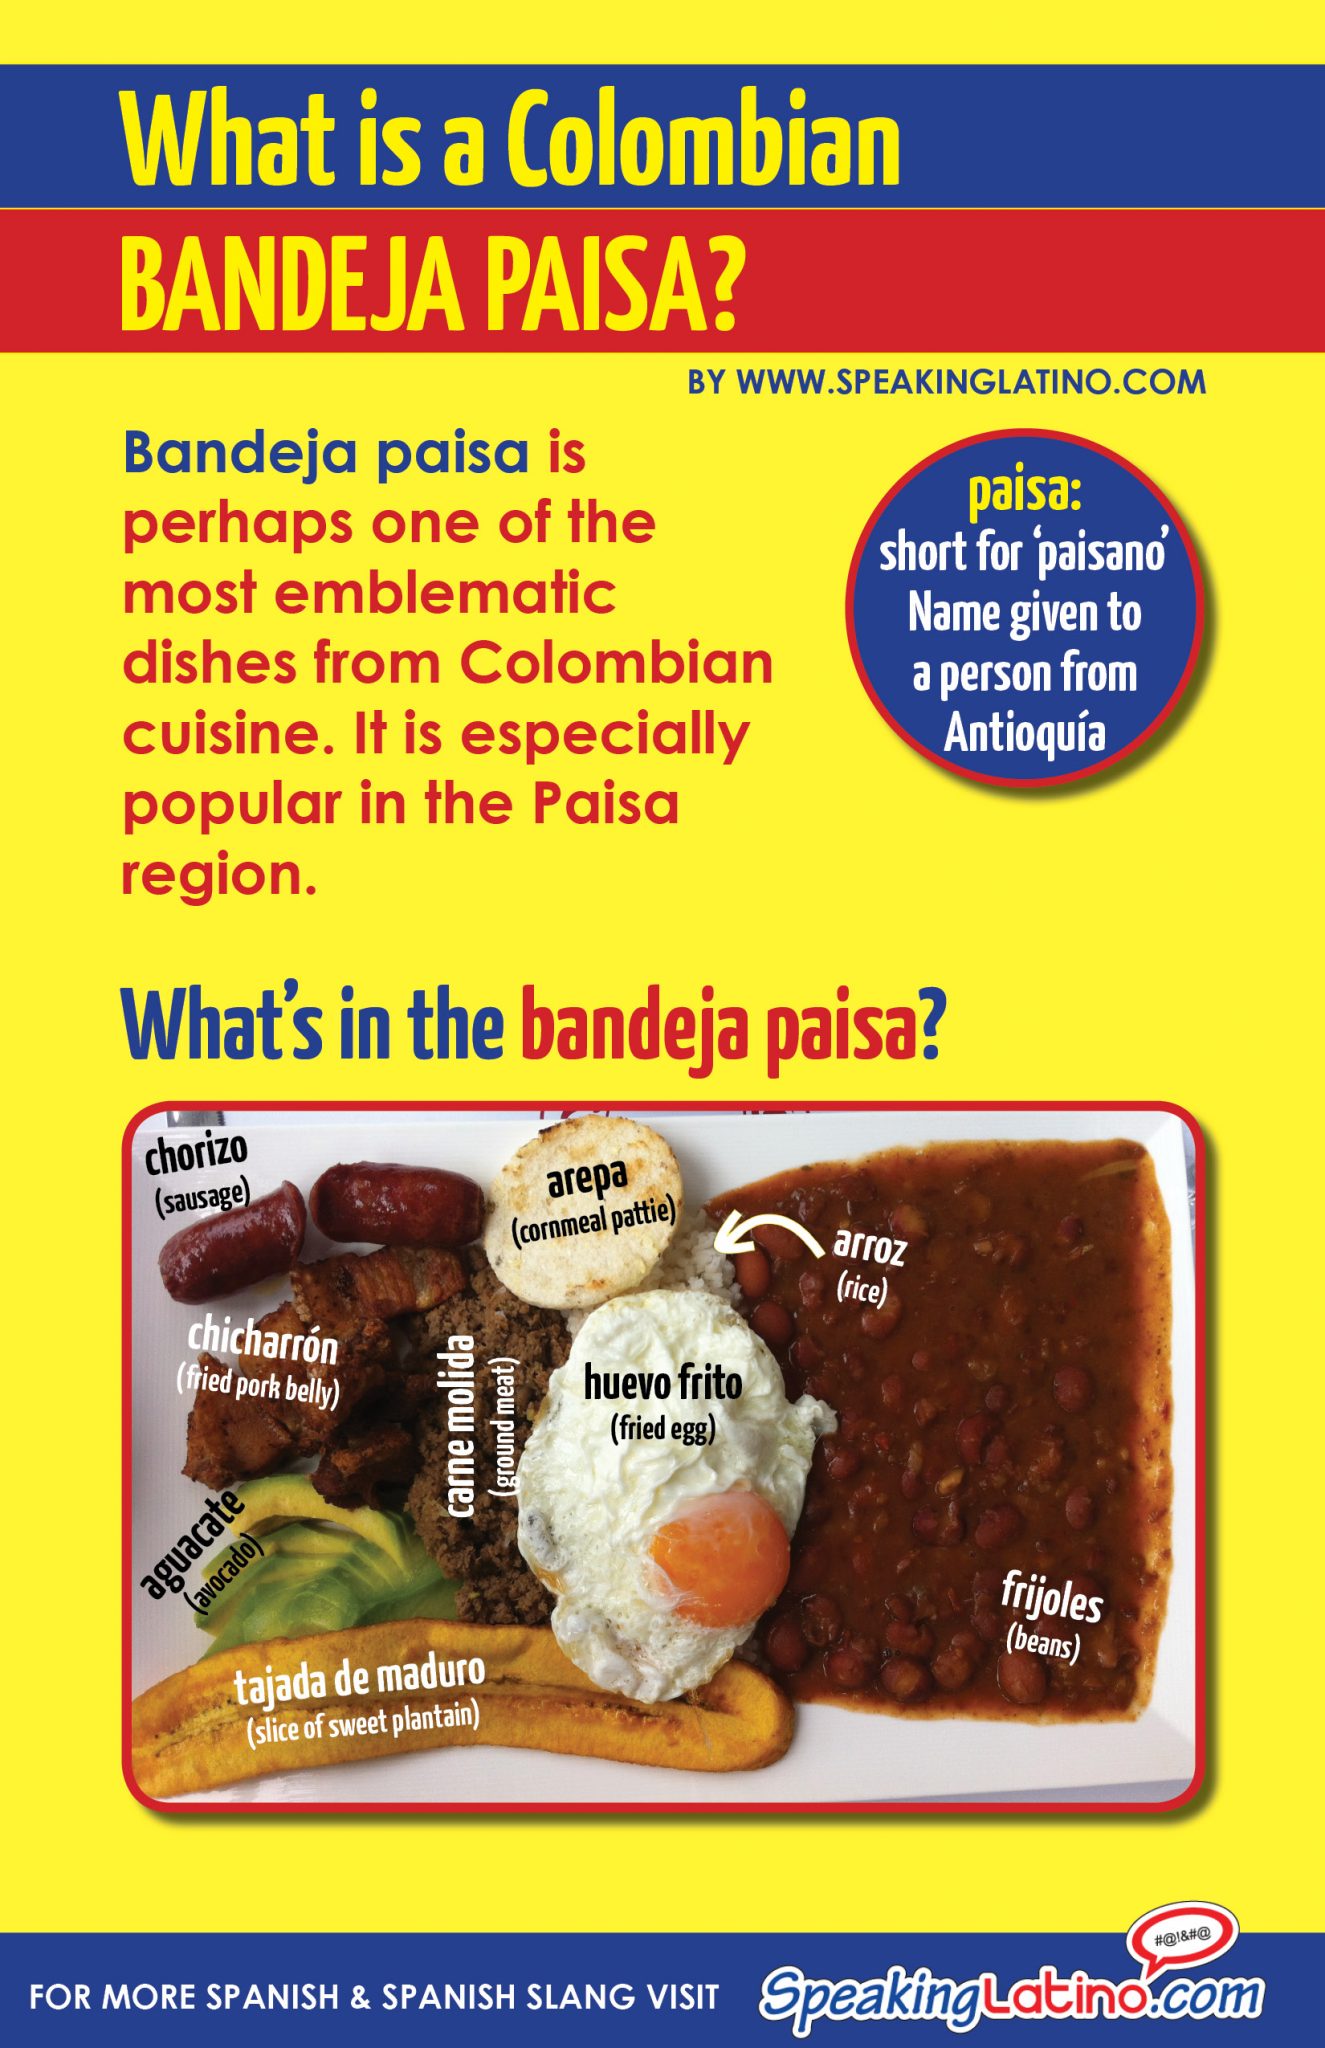 Infographic: The 9 Components of The Colombian Bandeja Paisa